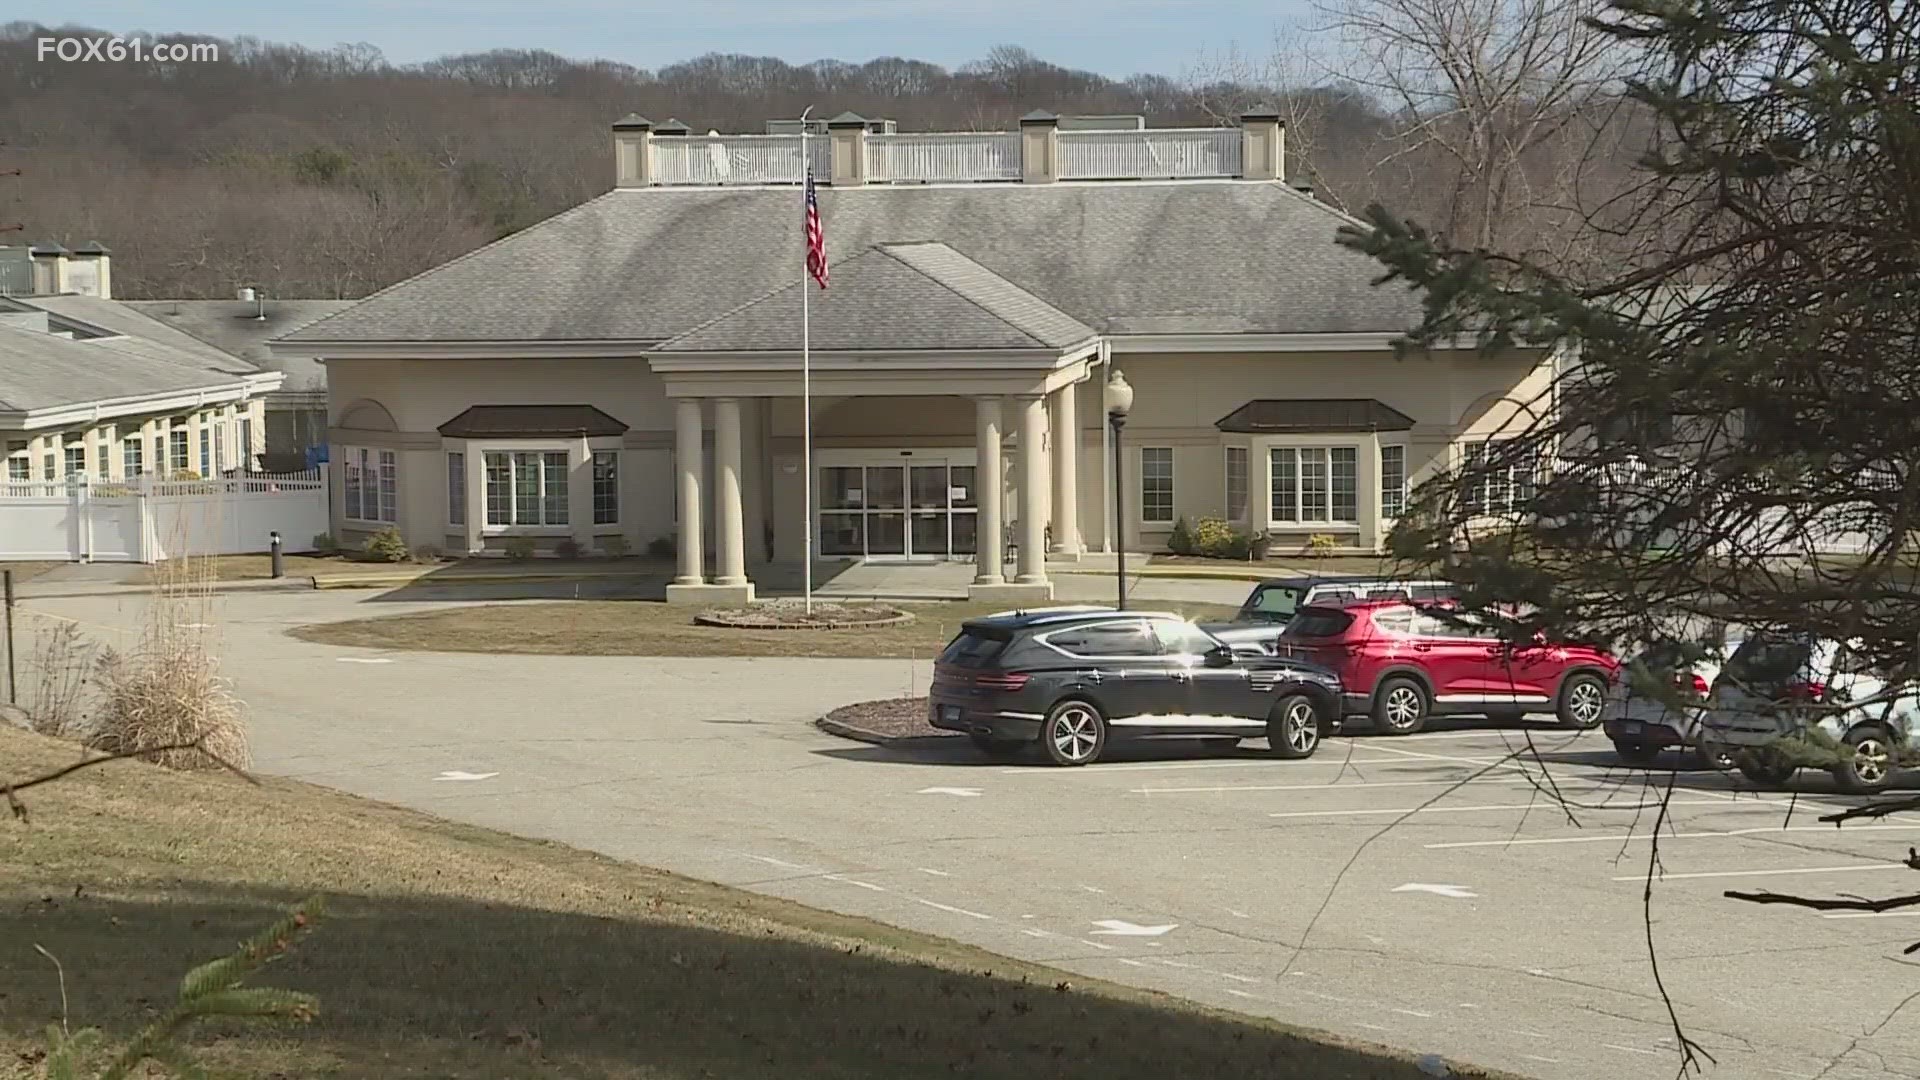 The Department of Public Health told FOX61 that operators of Greentree Manor failed to test for asbestos or notify them, as required, prior to a renovation.